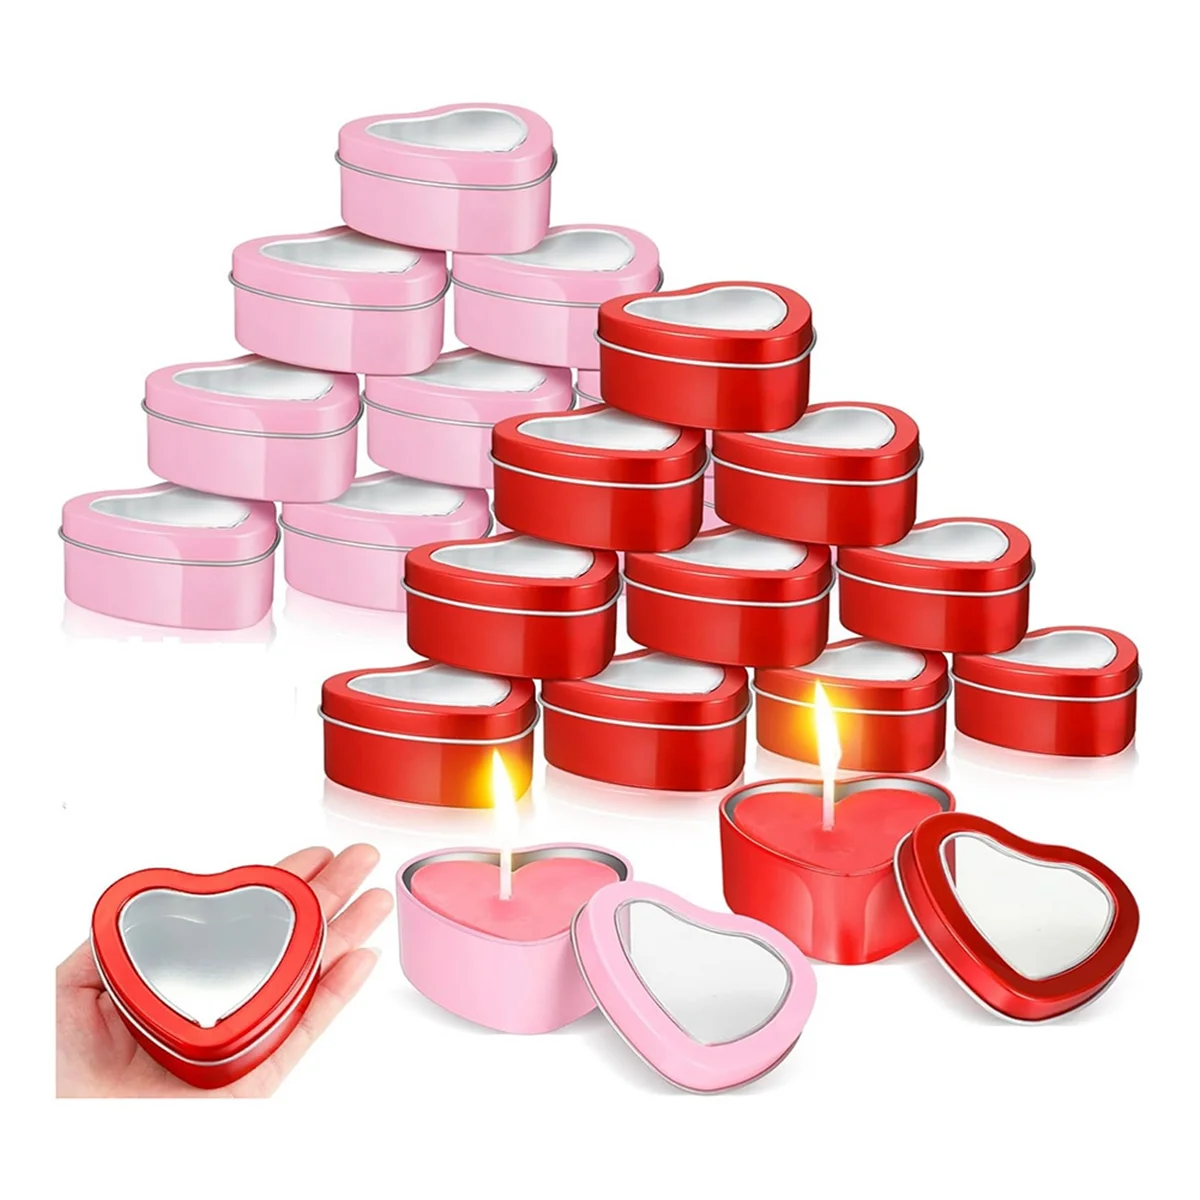 

24Pcs 4Oz Heart Shaped Metal Tins, Empty Tea Light Mold Heart Shaped Box with Clear Window Lids Tin Candle Containers